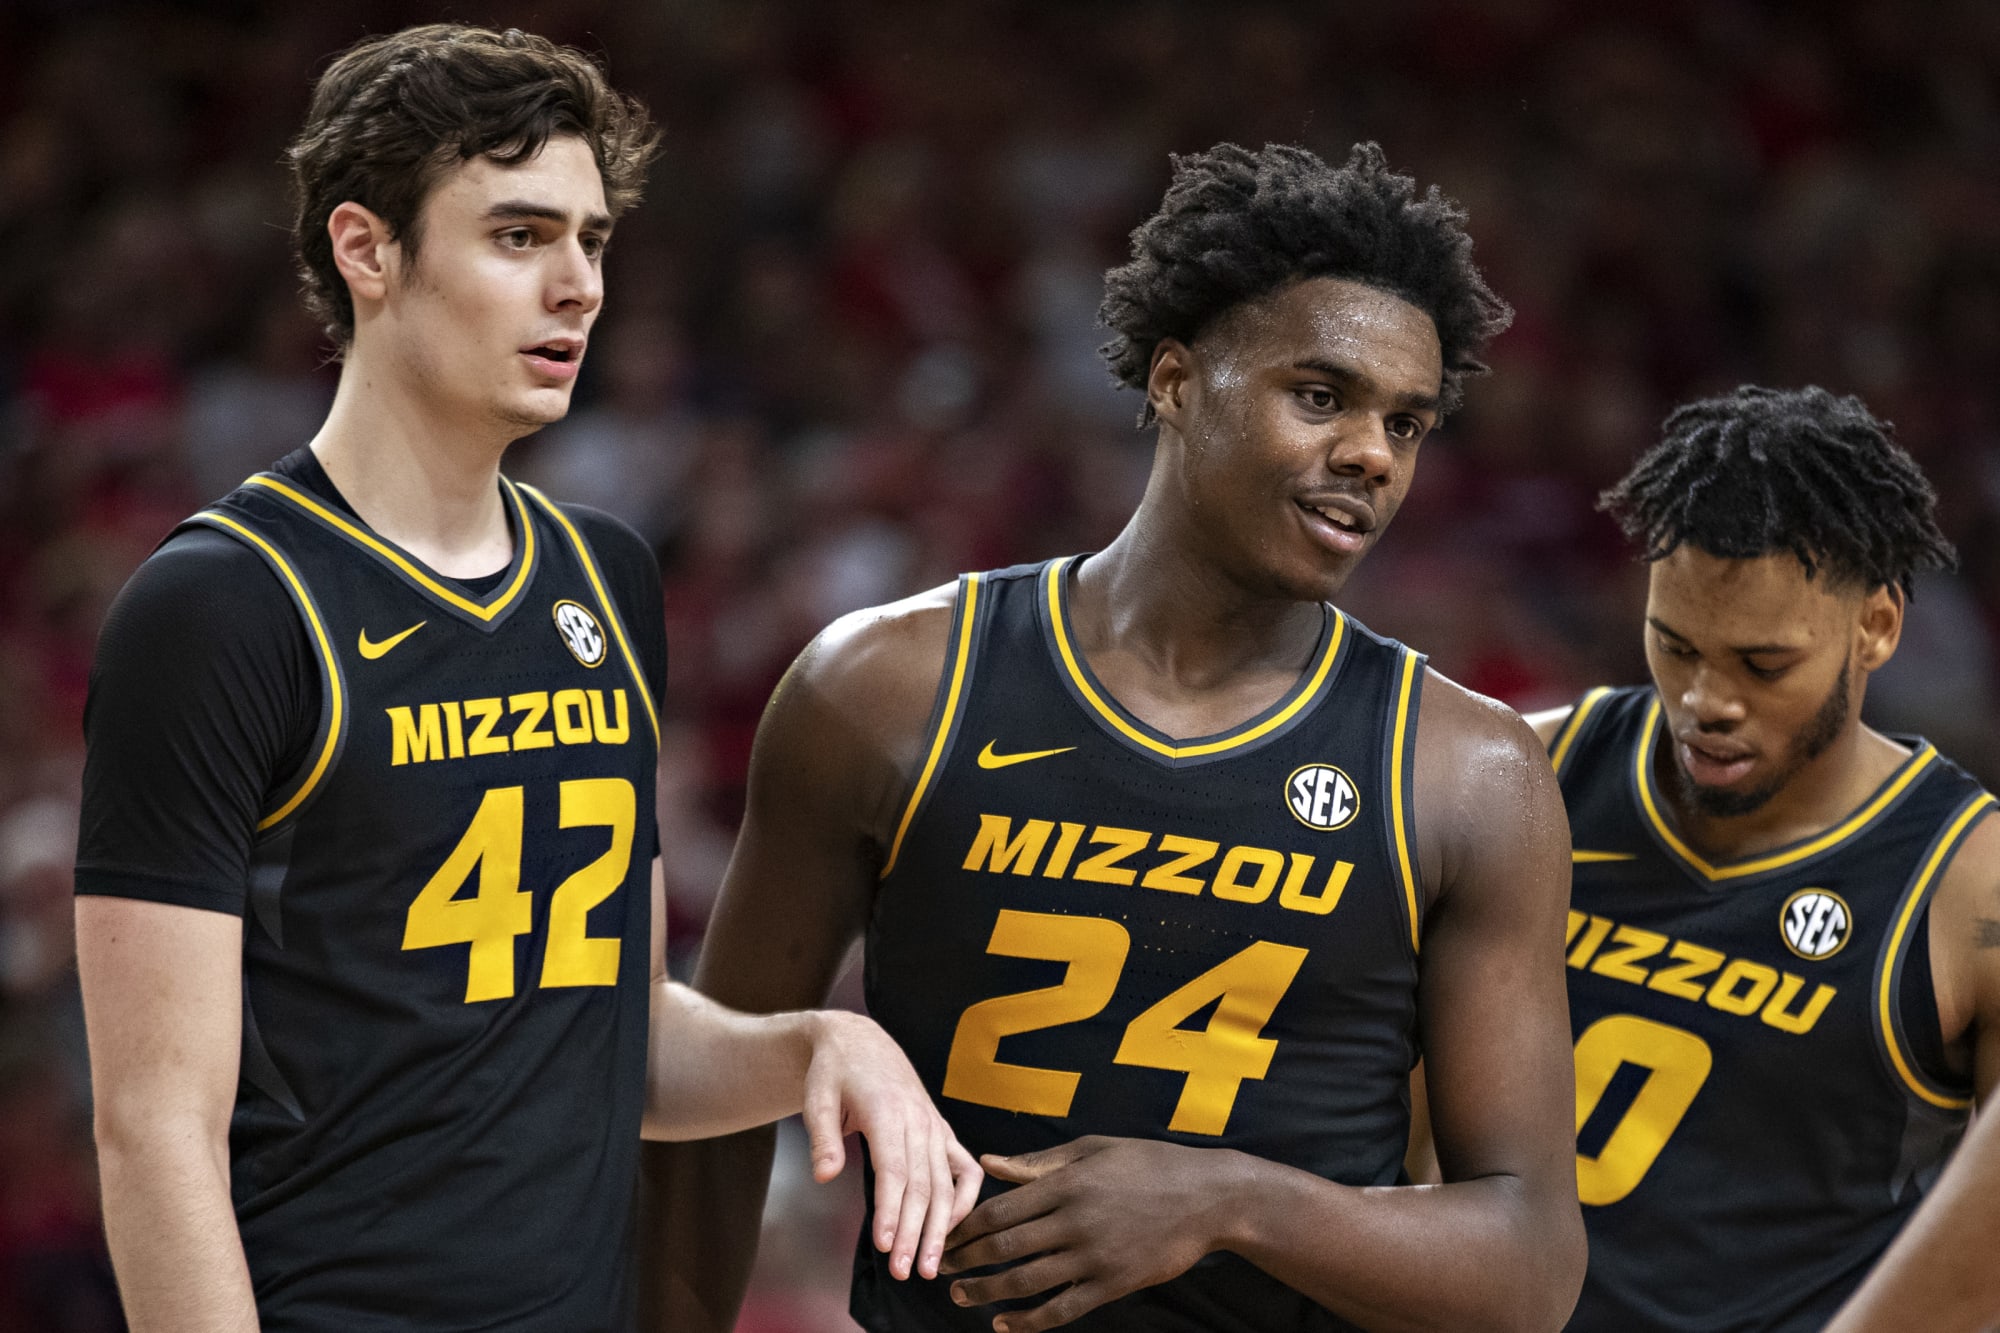 Missouri Basketball: Can Tigers be a threat in 2021 NCAA tournament?